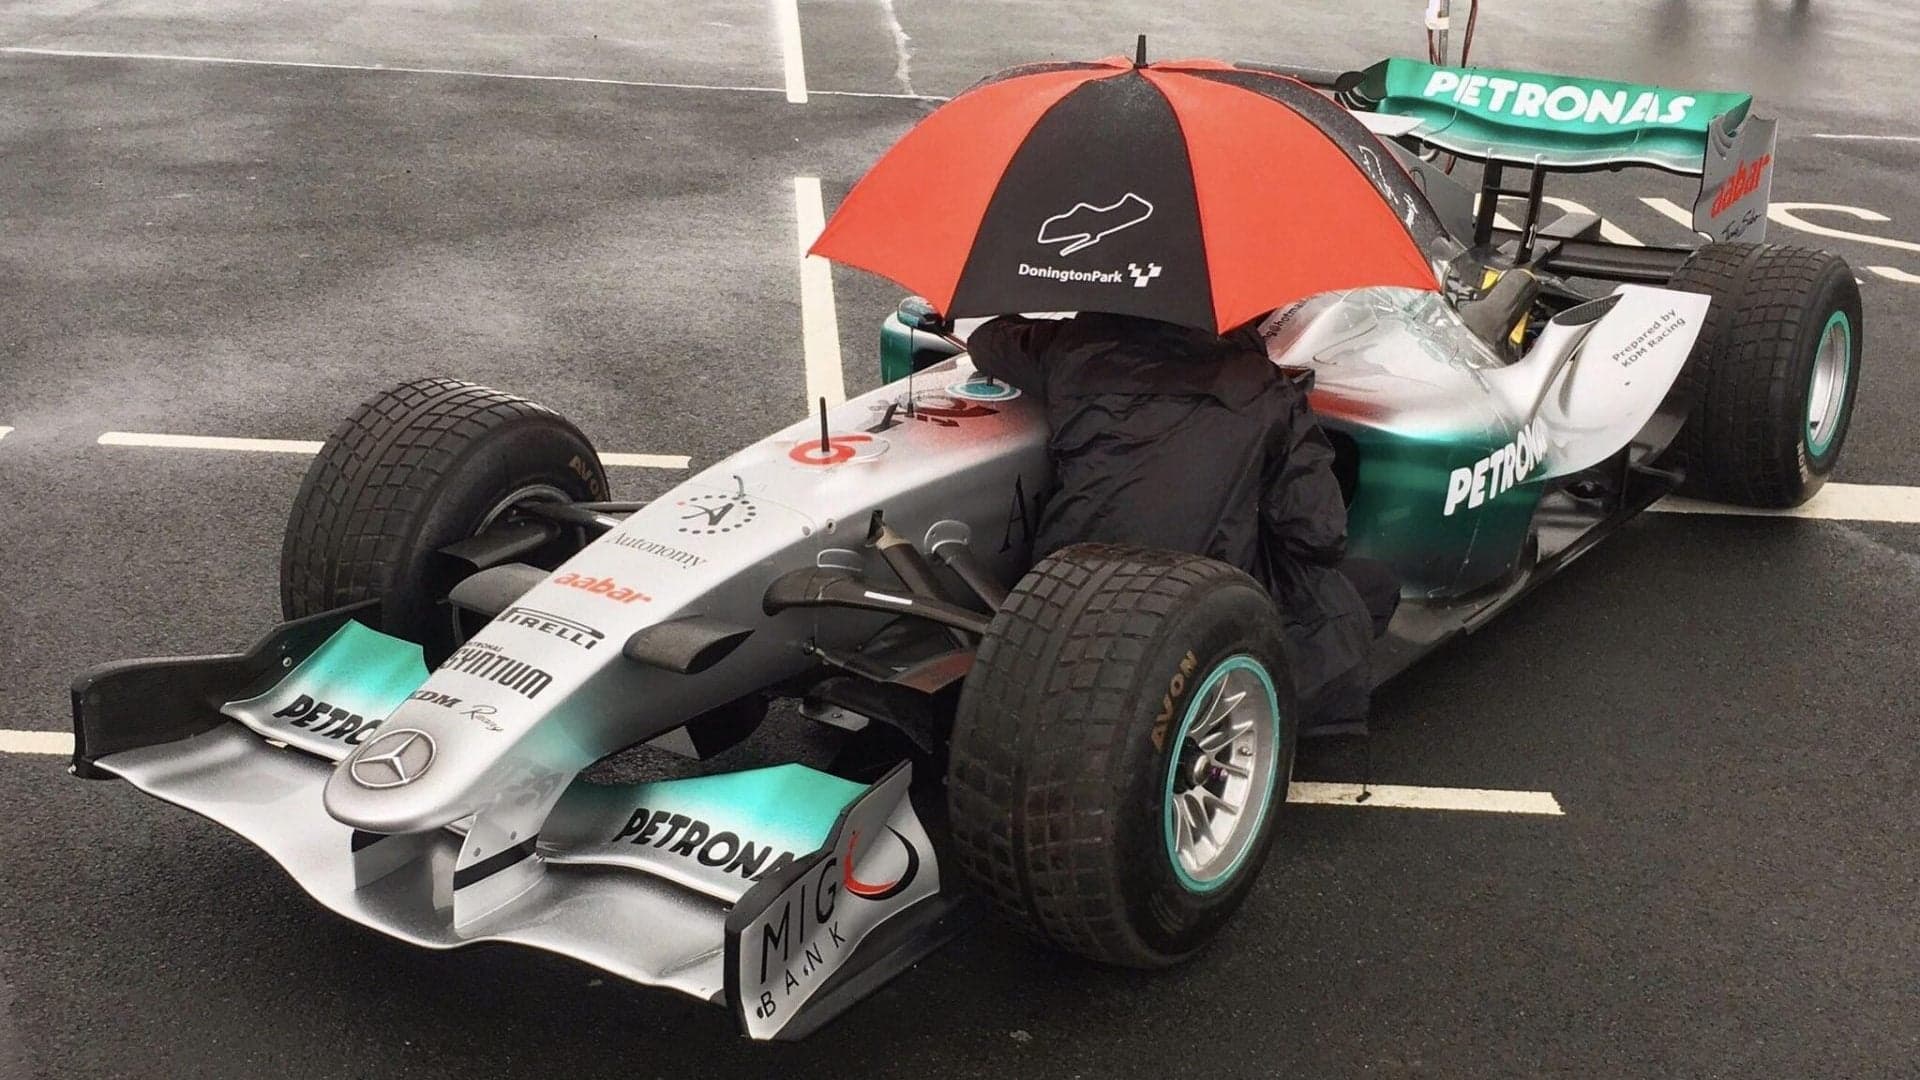 Why Is There a Honda Formula 1 Car Running Around Dressed as a Mercedes-AMG?